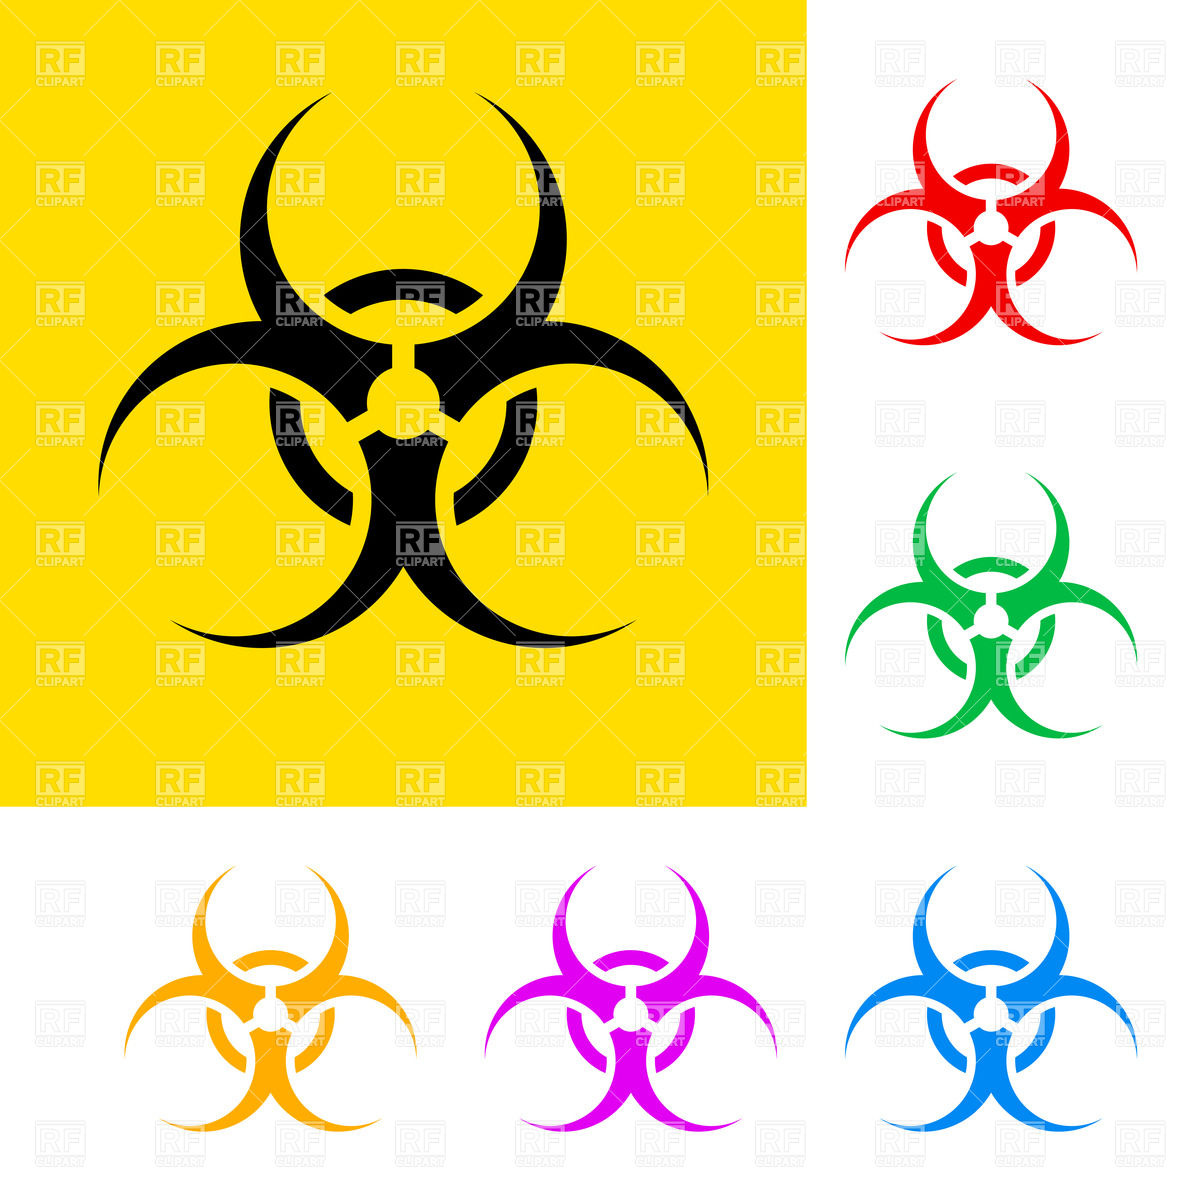 Biohazard Sign With Color Variations Download Royalty Free Vector